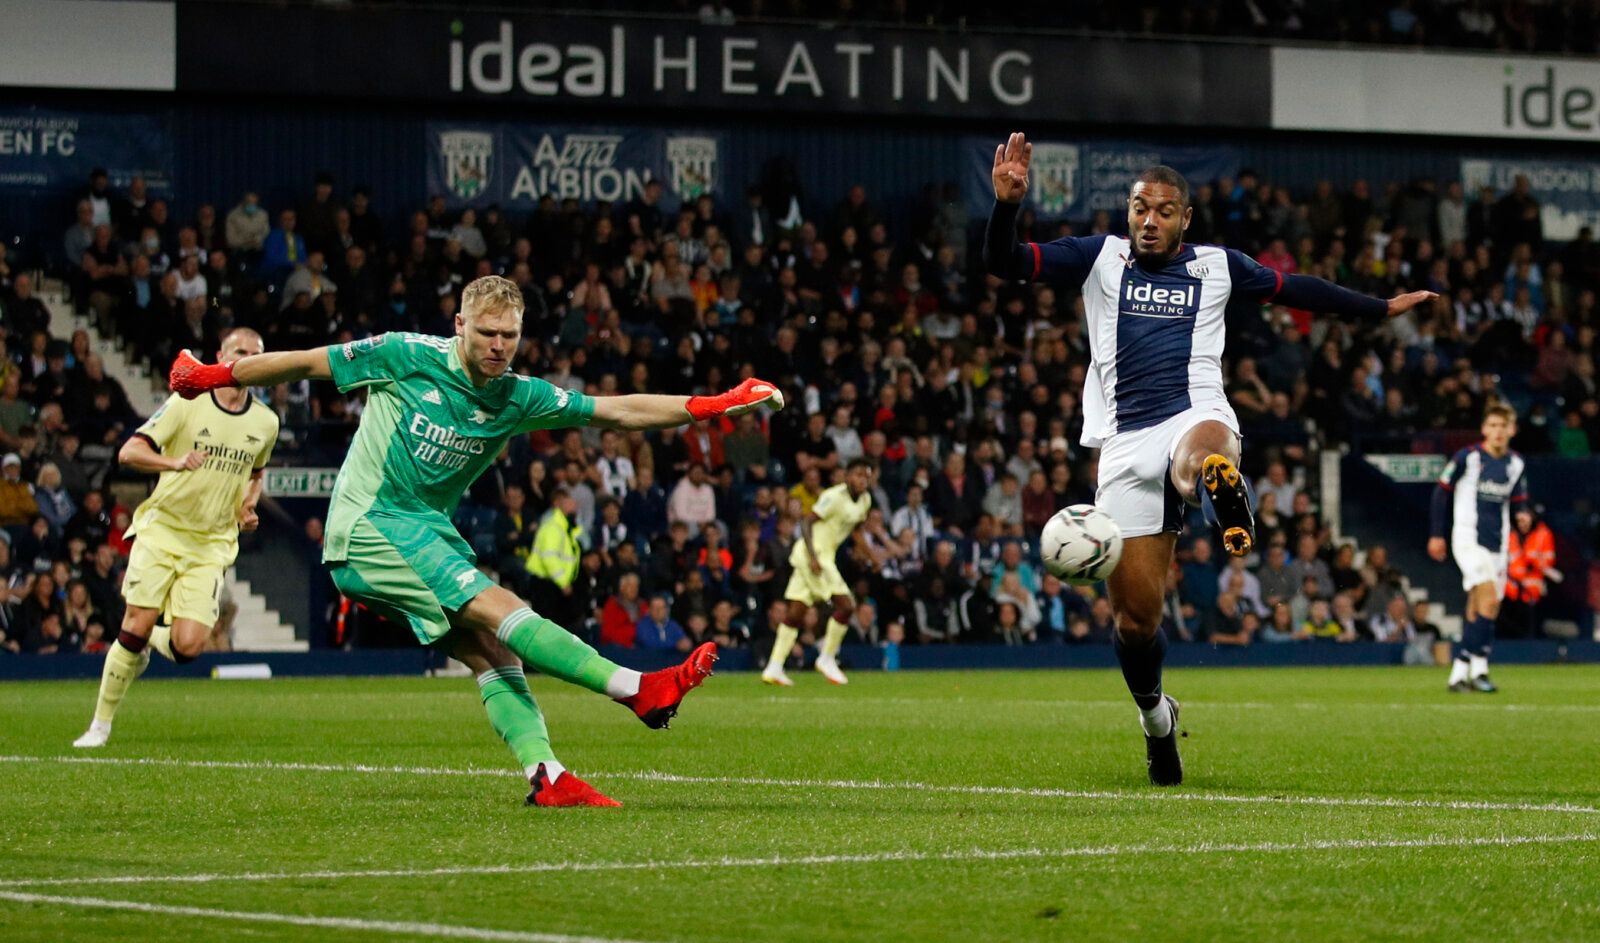 Soccer Football - Carabao Cup - Second Round - West Bromwich Albion v Arsenal - The Hawthorns, West Bromwich, Britain - August 25, 2021 Arsenal's Aaron Ramsdale in action with West Bromwich Albion's Kenneth Zohore Action Images via Reuters/Andrew Boyers EDITORIAL USE ONLY. No use with unauthorized audio, video, data, fixture lists, club/league logos or 'live' services. Online in-match use limited to 75 images, no video emulation. No use in betting, games or single club /league/player publication